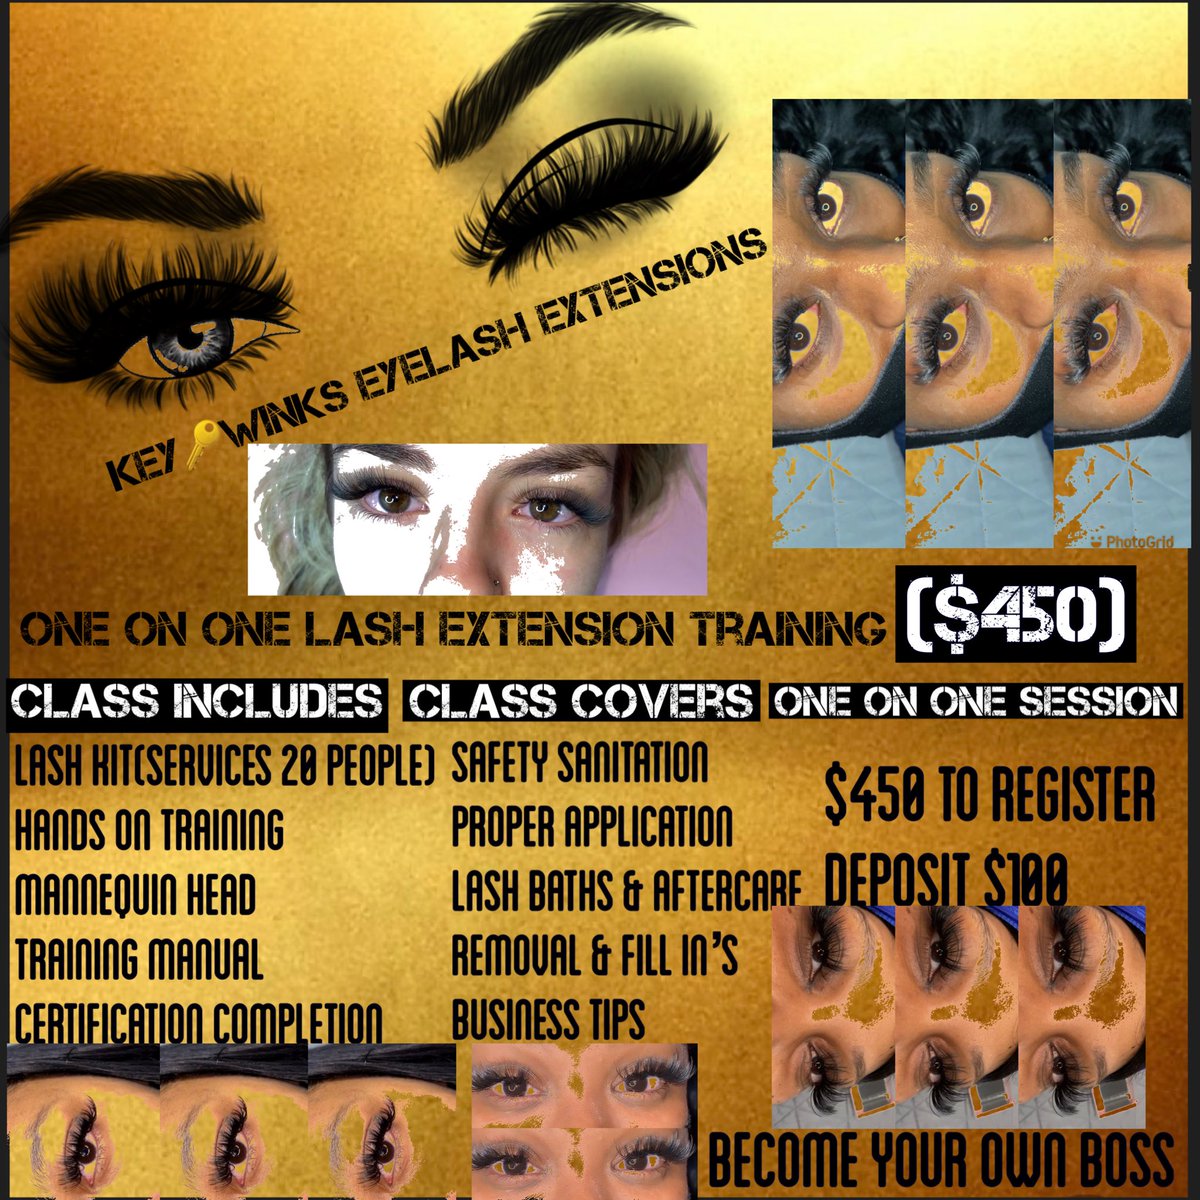 Make your 9-5 check in 1 day‼️ BECOME YOUR OWN BOSS LADIES💅🏽 once I seen I can make $800 just in a day I quit my job🥰 lash extensions will not fail you💞 TEXT(248)906-6427 for more details on registering #DETROITLASHTECH #MICHIGANLASHTECH #DETROITLASHTRAINING